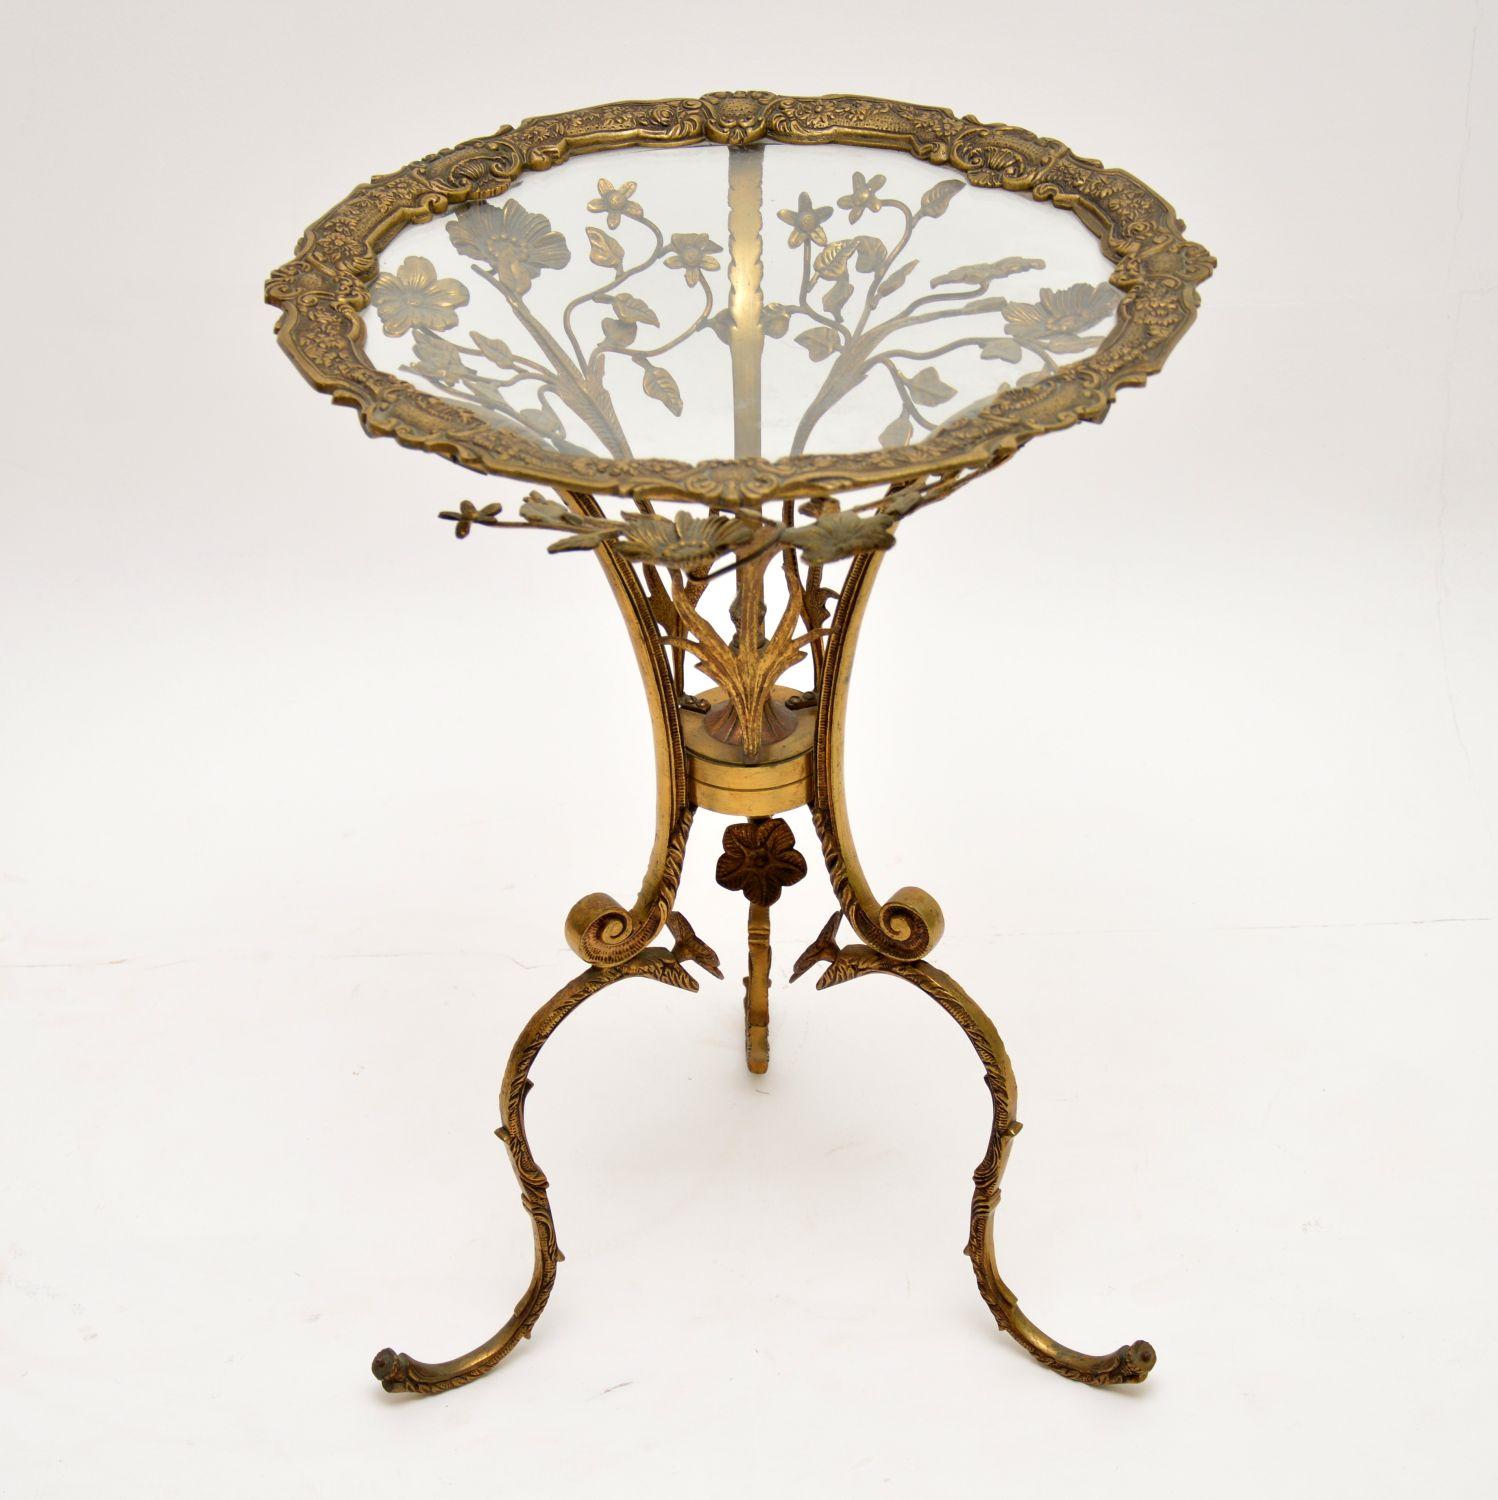 Antique brass side table with some very intricate castings and a lot of floral decorations. It has a glass top so all the flowers can be seen through the top and it would make an excellent lamp table. I would date this to around the 1930s-1950s